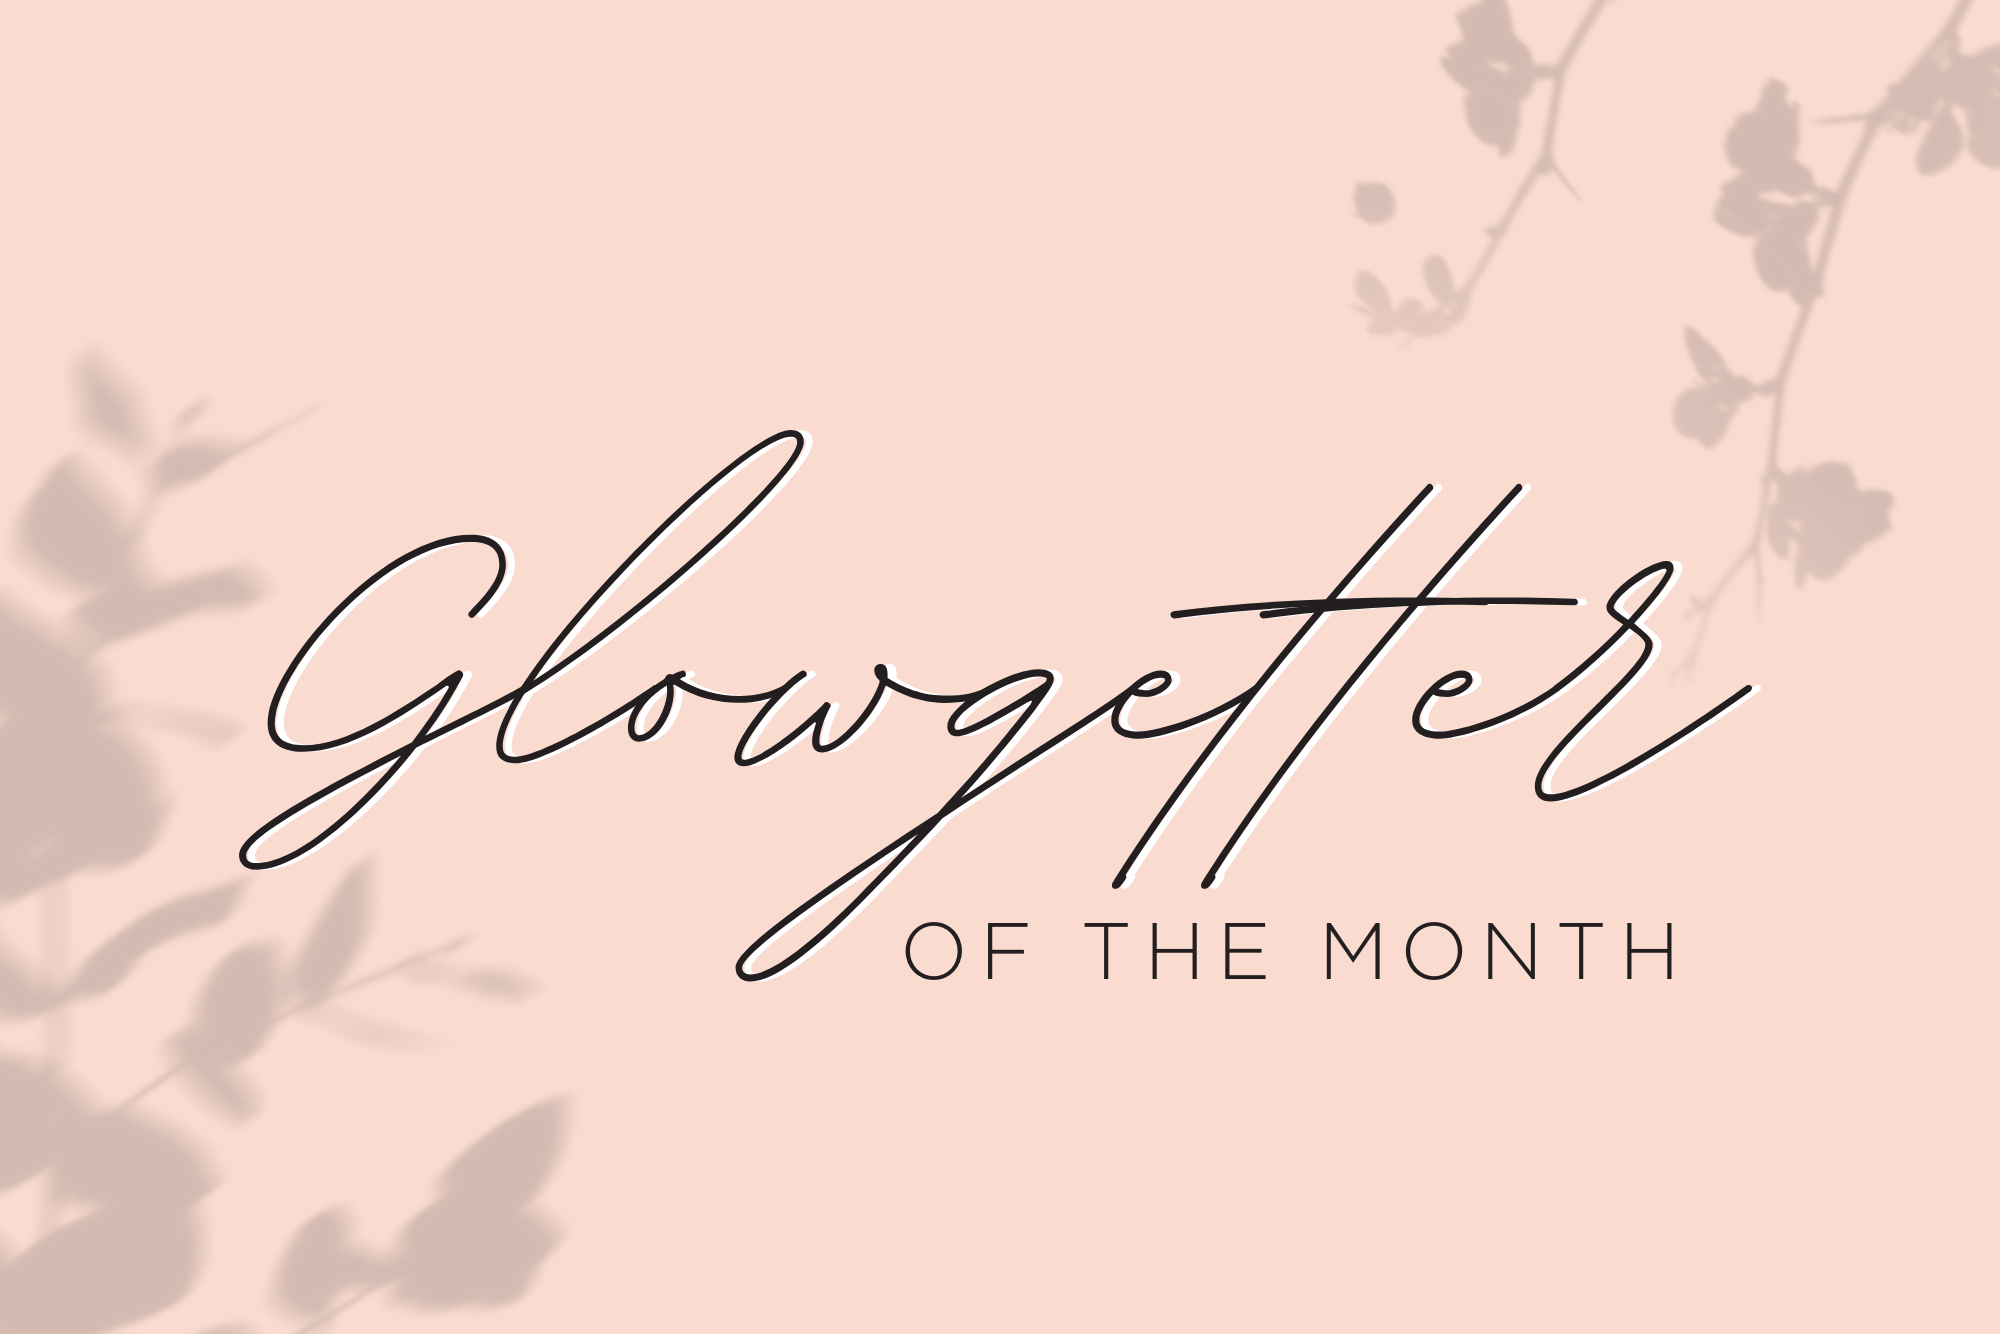 glowgetter-of-the-month-april-2021